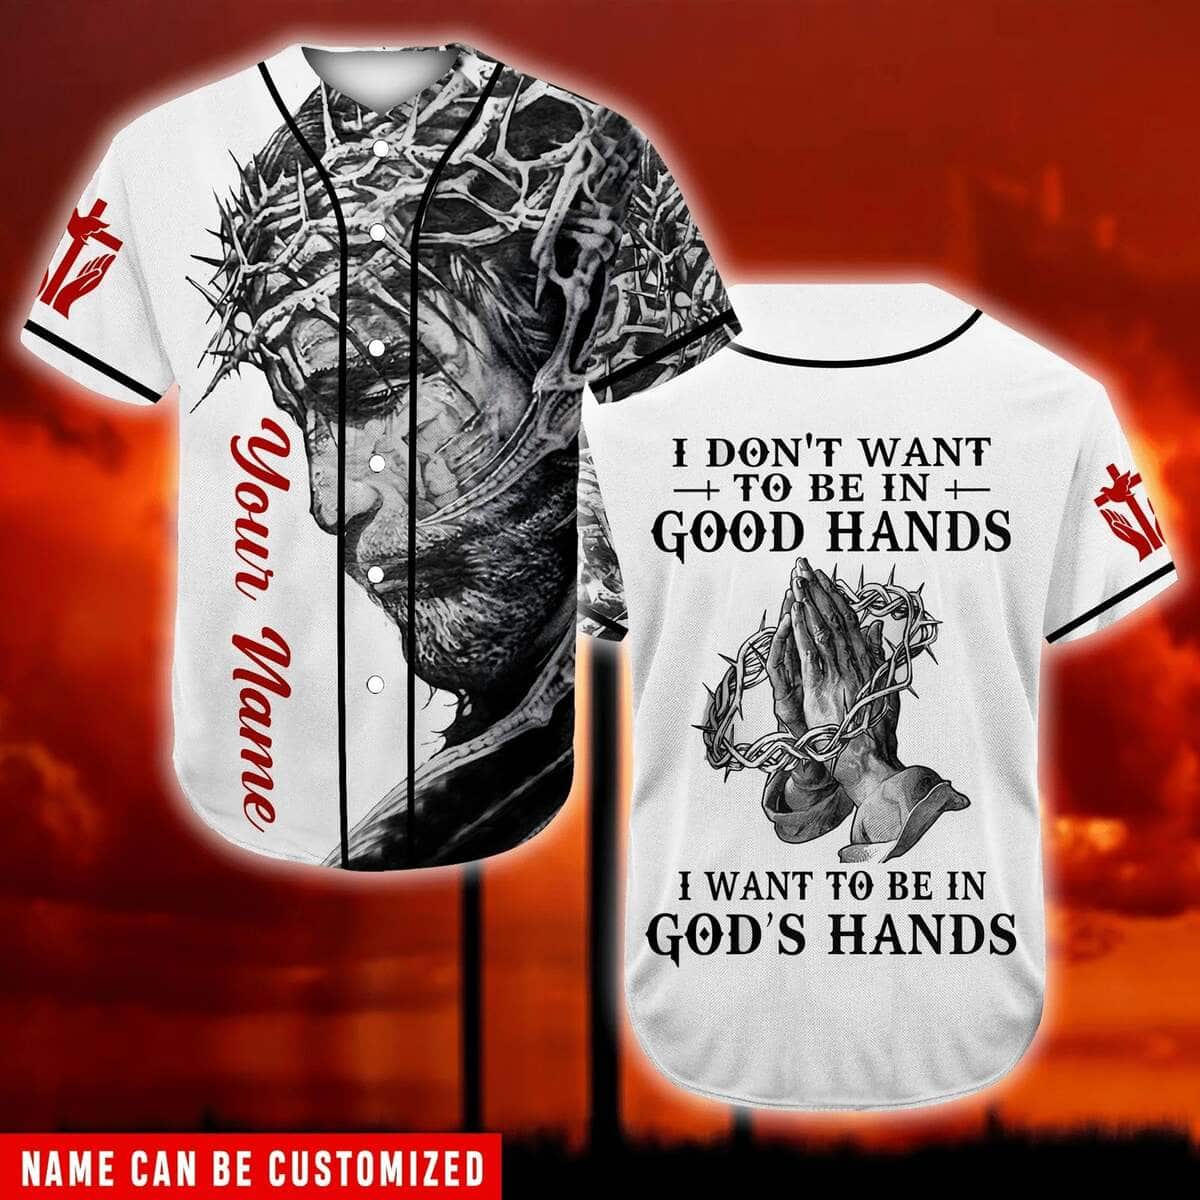 Customize Personalized Pray Christ's Hand I Want To Be In God's Hand Baseball Jersey